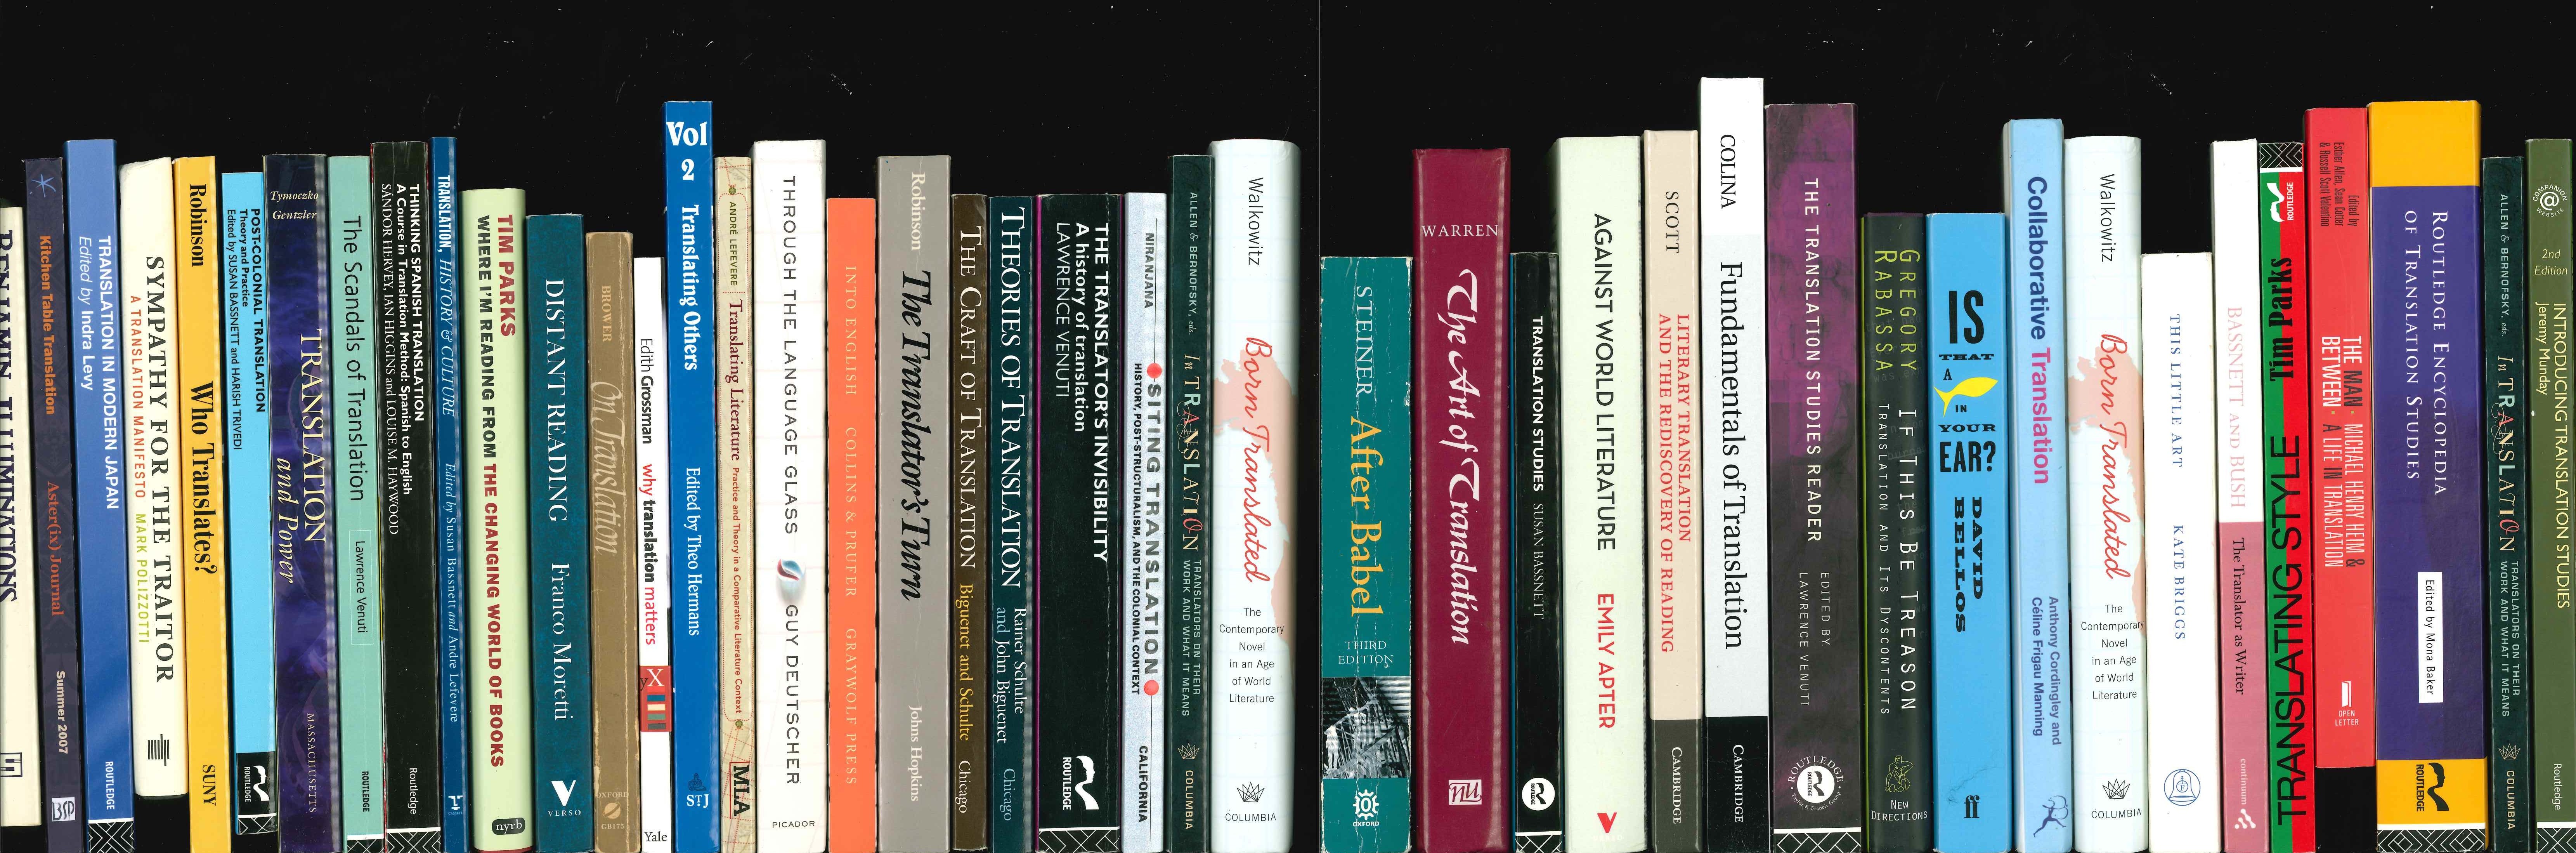 Some books of East Collection, from brazilian publisher Editora